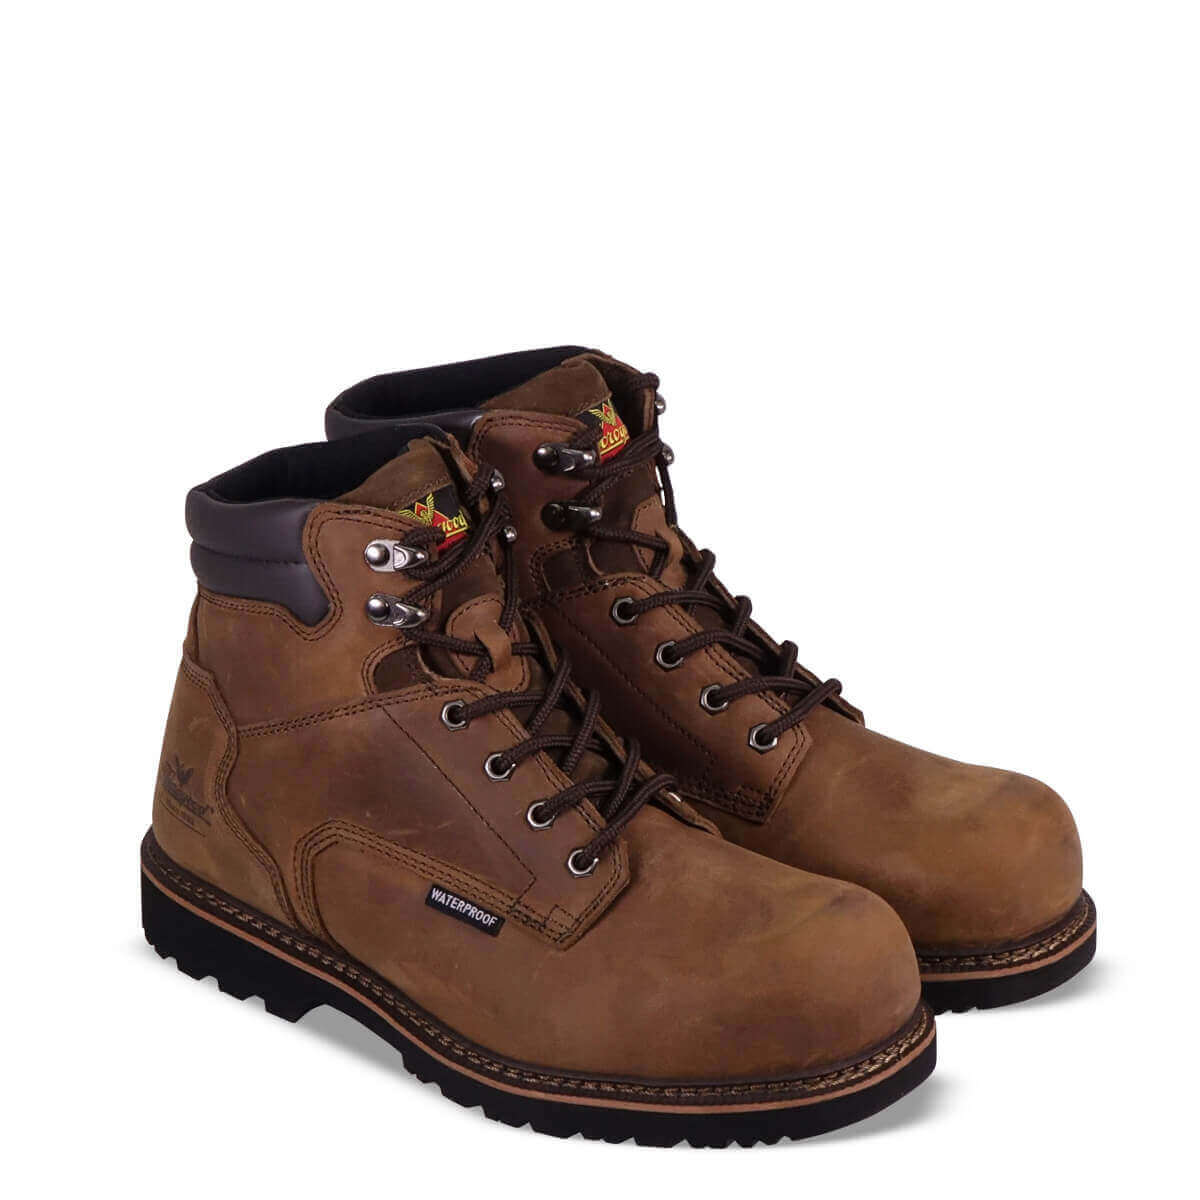 Pair shot of V-series waterproof 6" crazyhorse safety toe boot